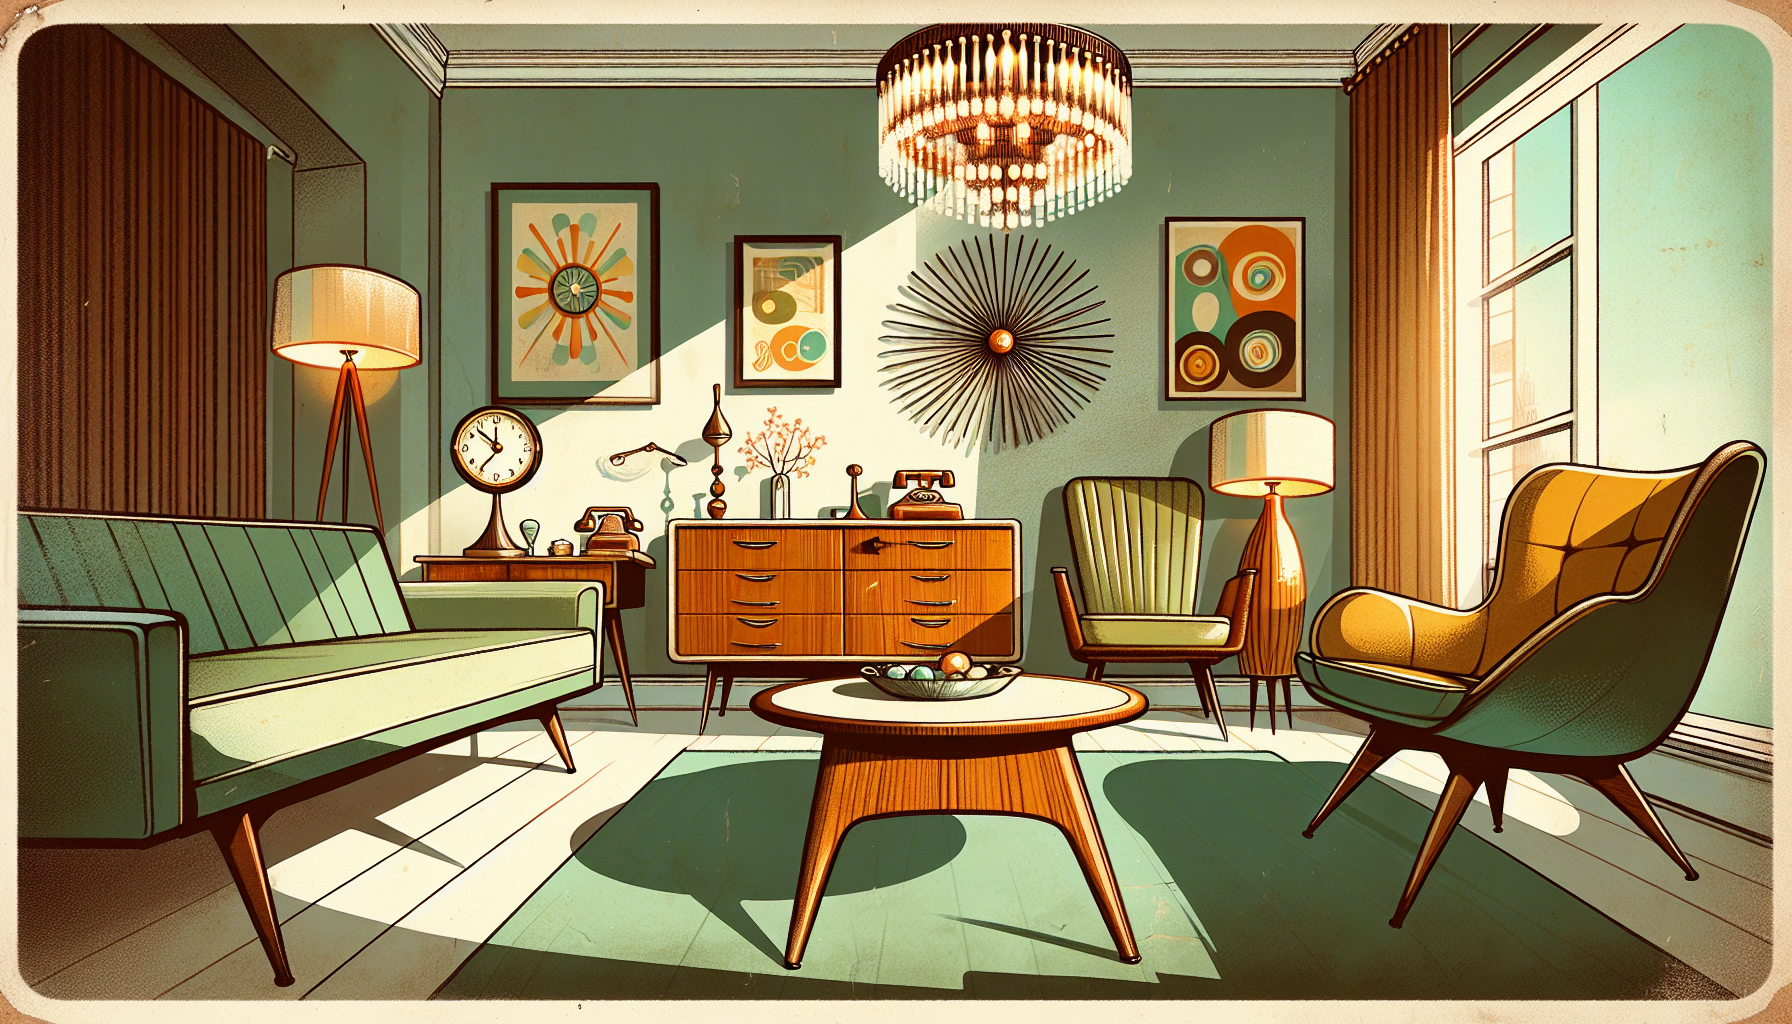 A whimsical illustration featuring midcentury modern furniture and vintage decor in a retro setting